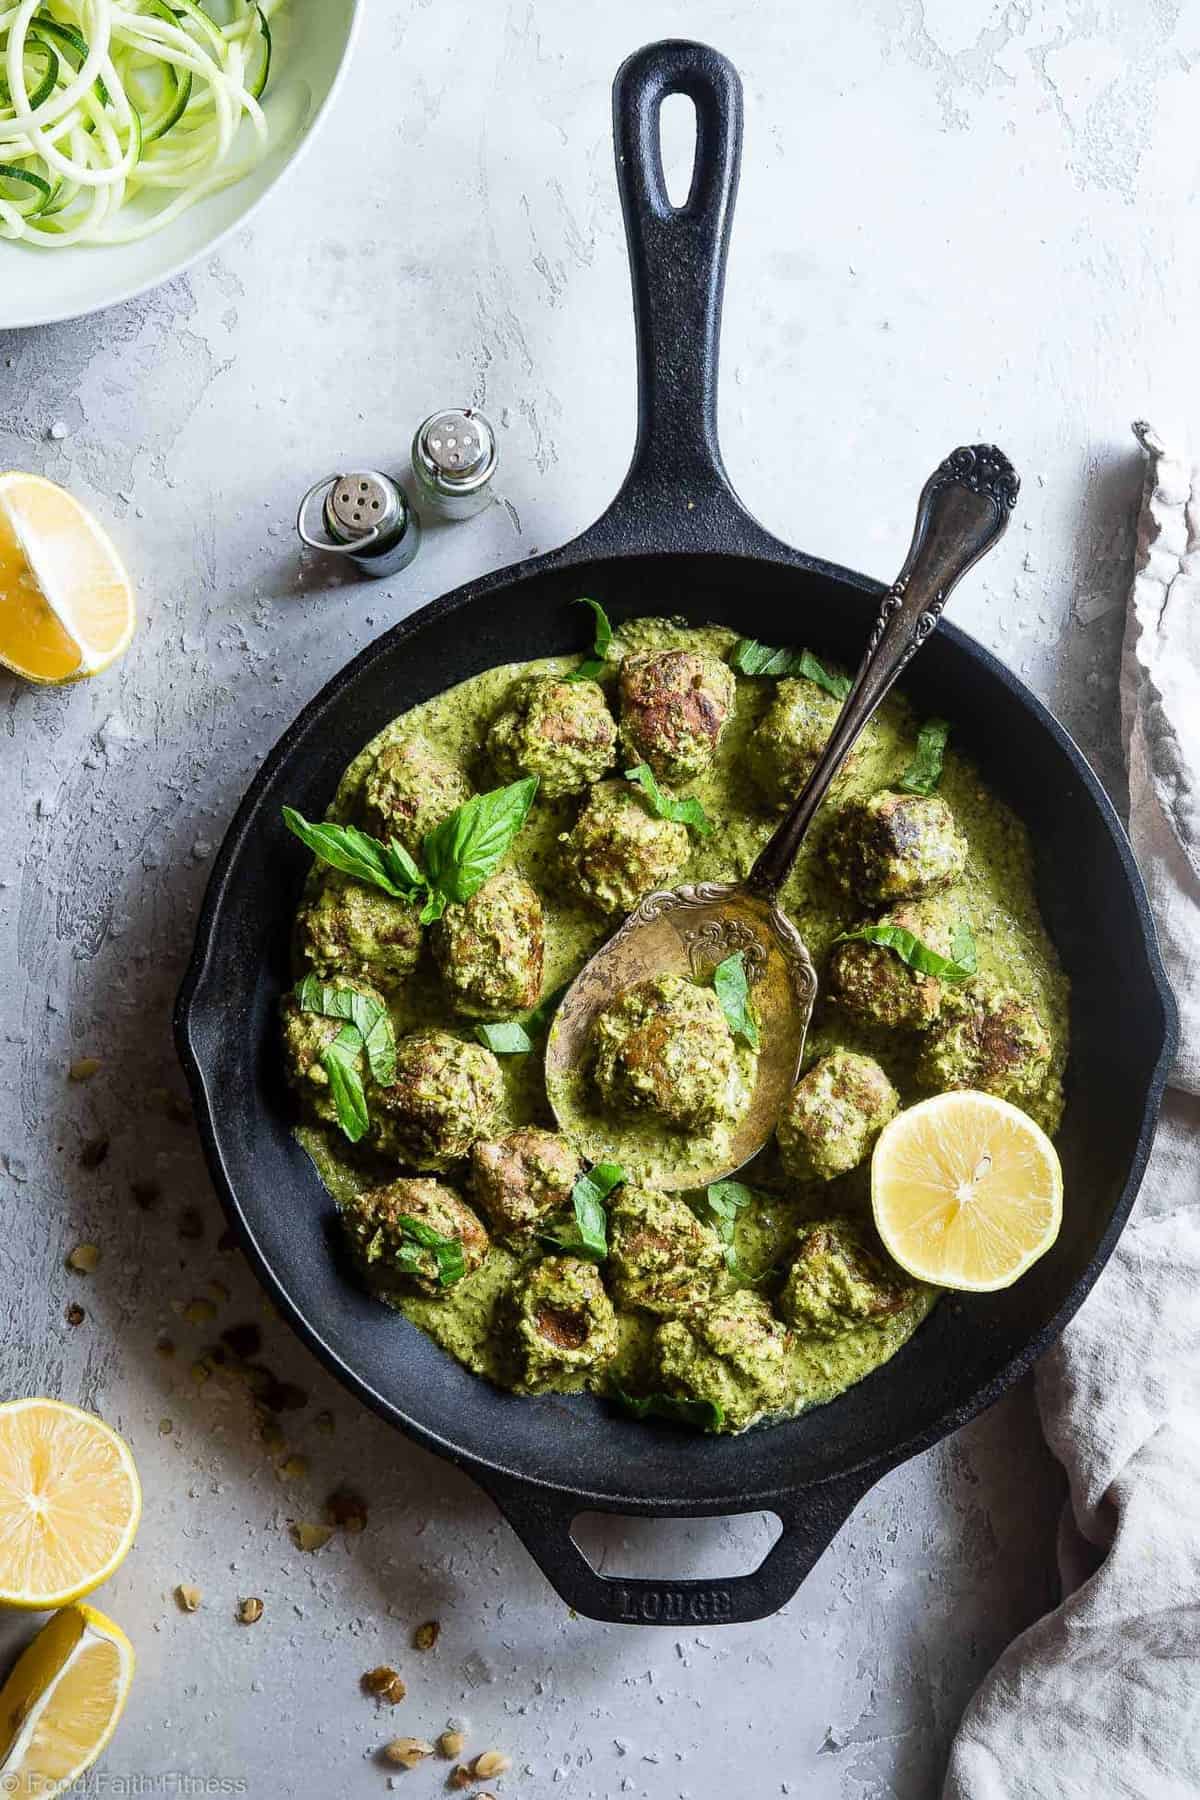 Low Carb Whole30 Turkey Meatballs with Pesto Cream Sauce - These healthy turkey meatballs are simmered in a coconut milk basil pesto cream sauce for an easy, weeknight meal that is keto and paleo friendly and so tasty! | #Foodfaithfitness | #Paleo #Whole30 #Lowcarb #Keto #Healthy